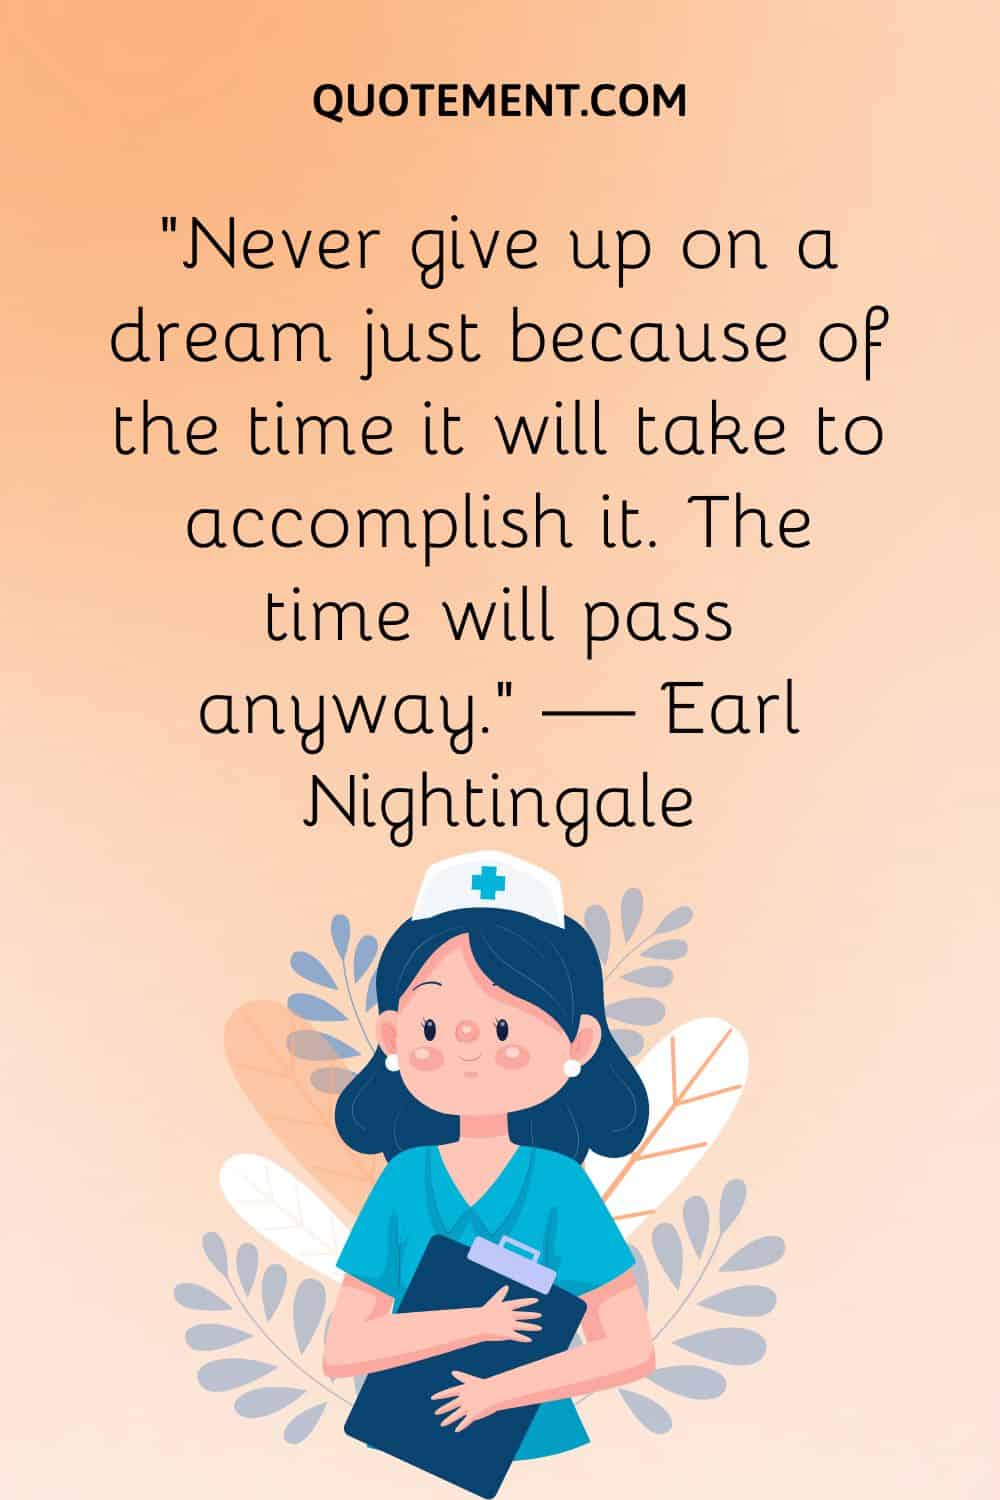 Never give up on a dream just because of the time it will take to accomplish it. The time will pass anyway. — Earl Nightingale